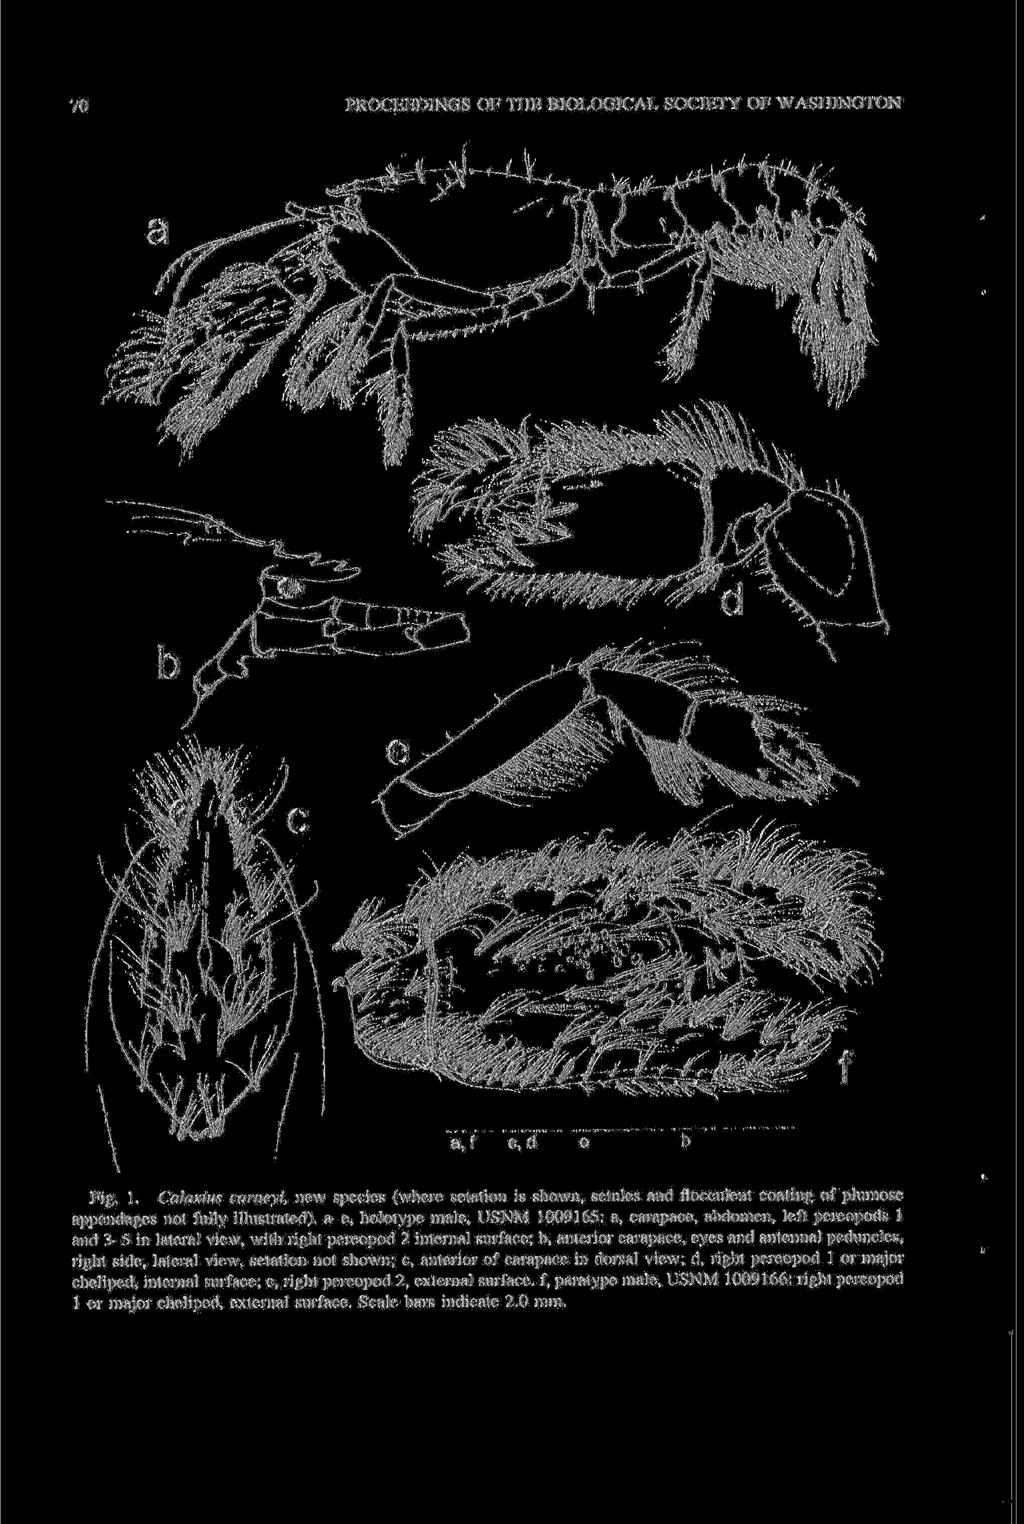 70 PROCEEDINGS OF THE BIOLOGICAL SOCIETY OF WASHINGTON Fig. I. Calaxius carnevi, new species (where setation is shown, setules and flocculent coating of plumose appendages not fully illustrated), a-e.